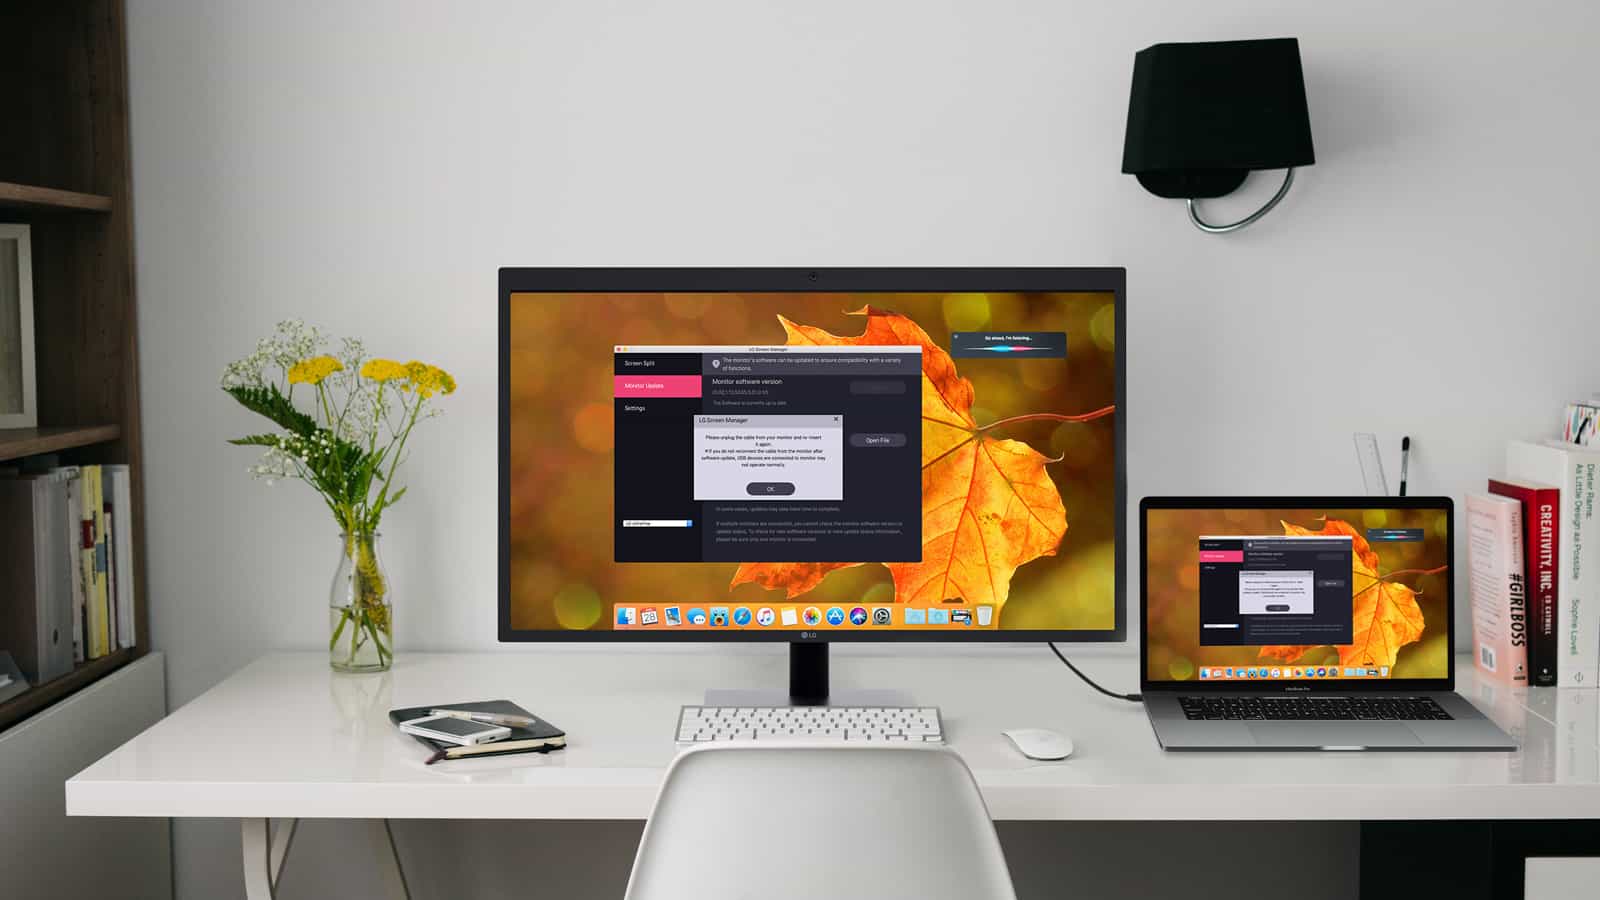 That sweet macOS High Sierra update will be painless for LG UltraFine Monitor owners.